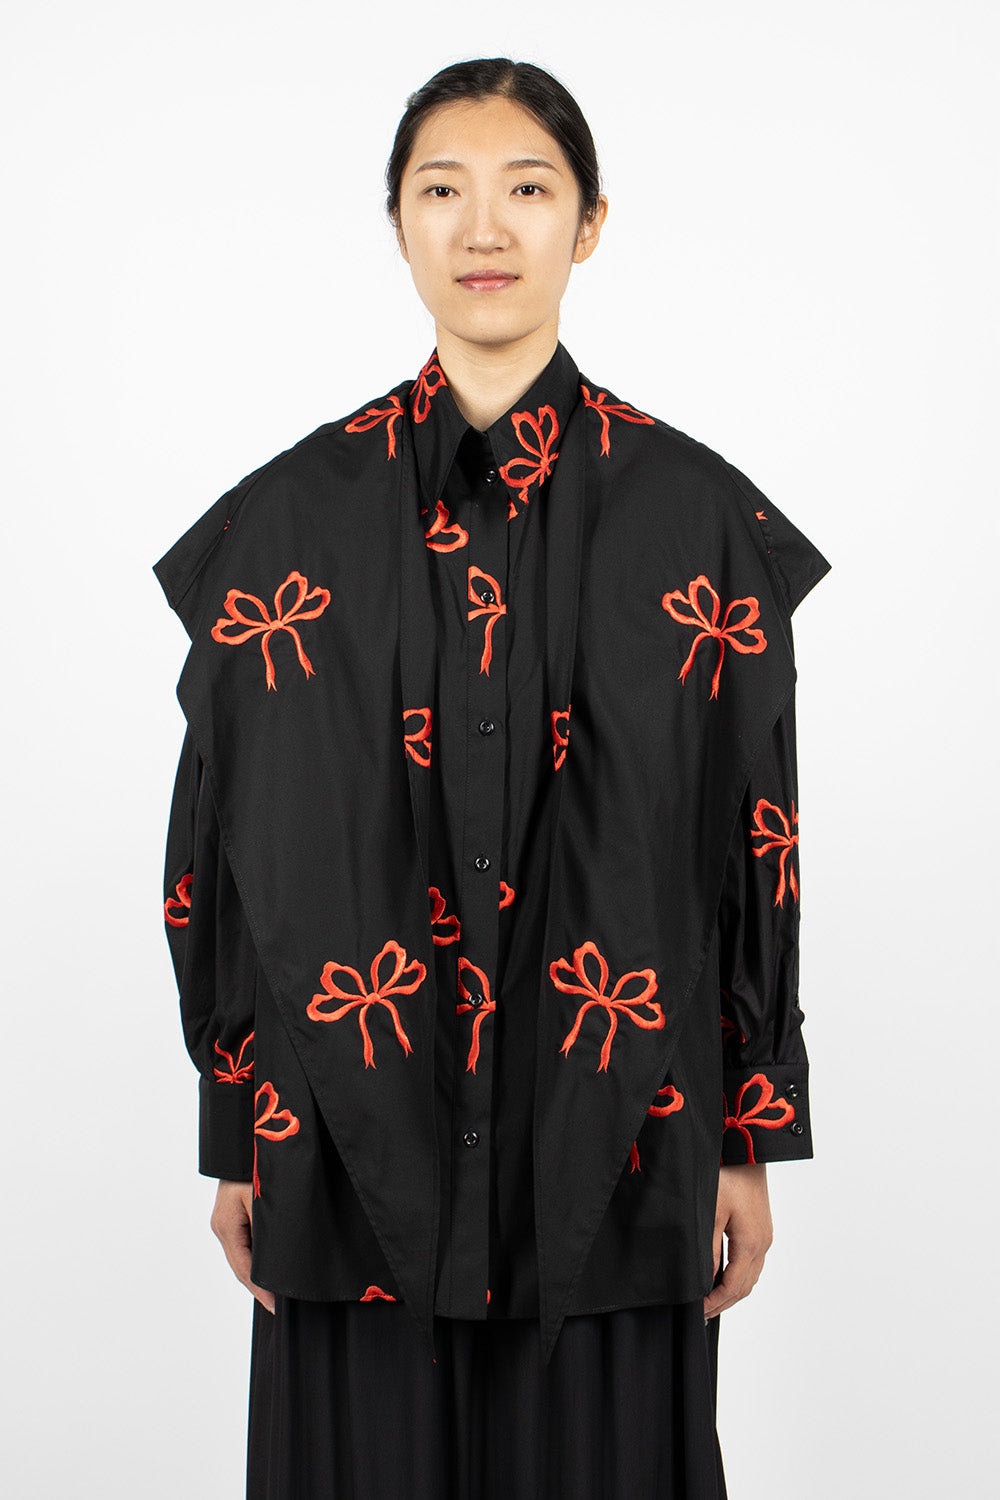 Bow Embroidered Shirt Black/Red